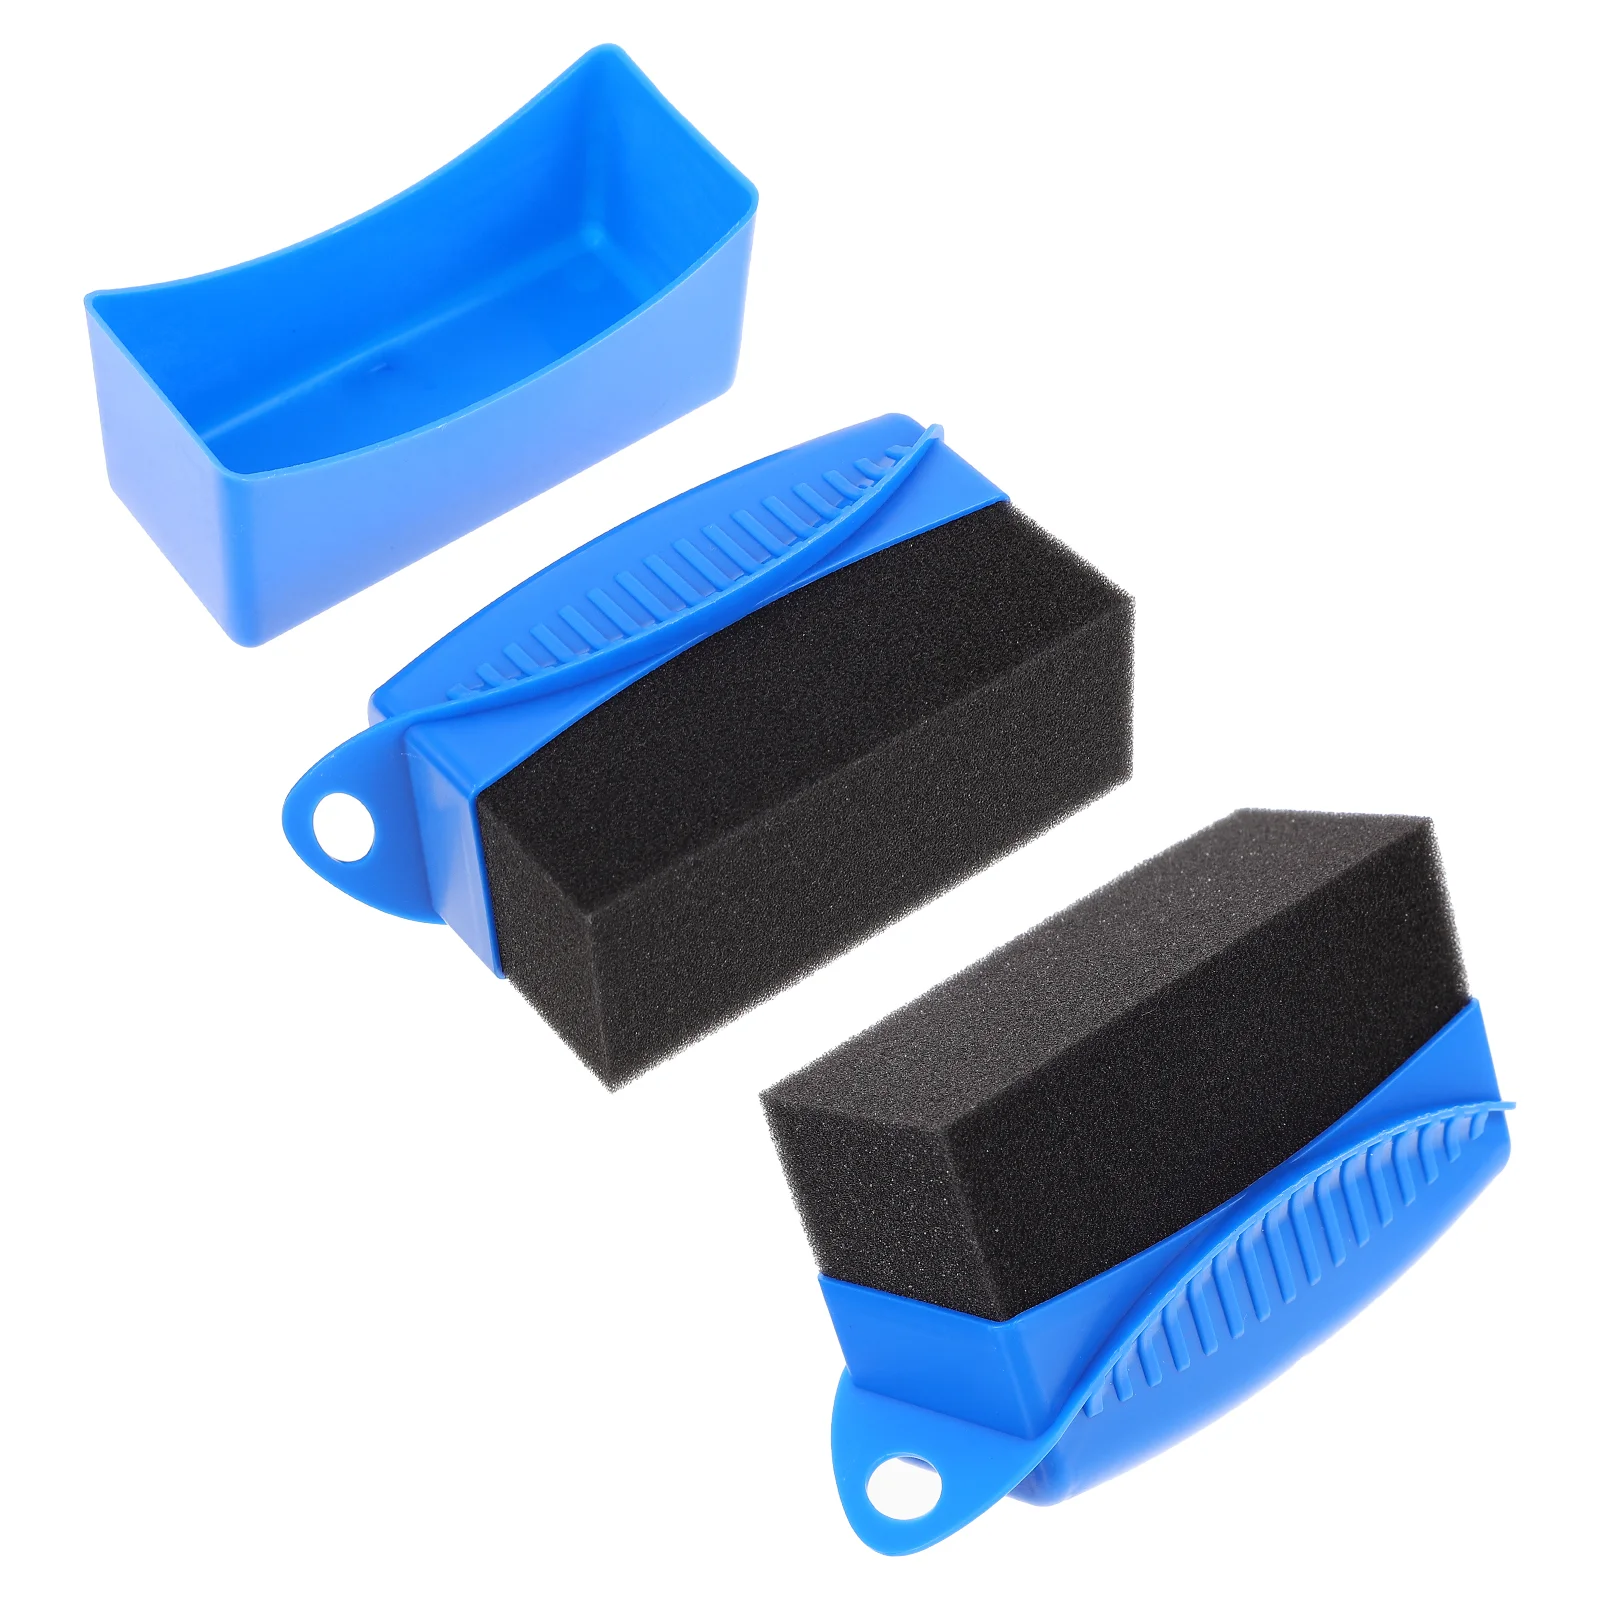 

2 Pcs Covered Tire Brush Auto Waxing Decorating Tools Sponge Car Polishing Pp Wheel Cleaning Supplies Beauty